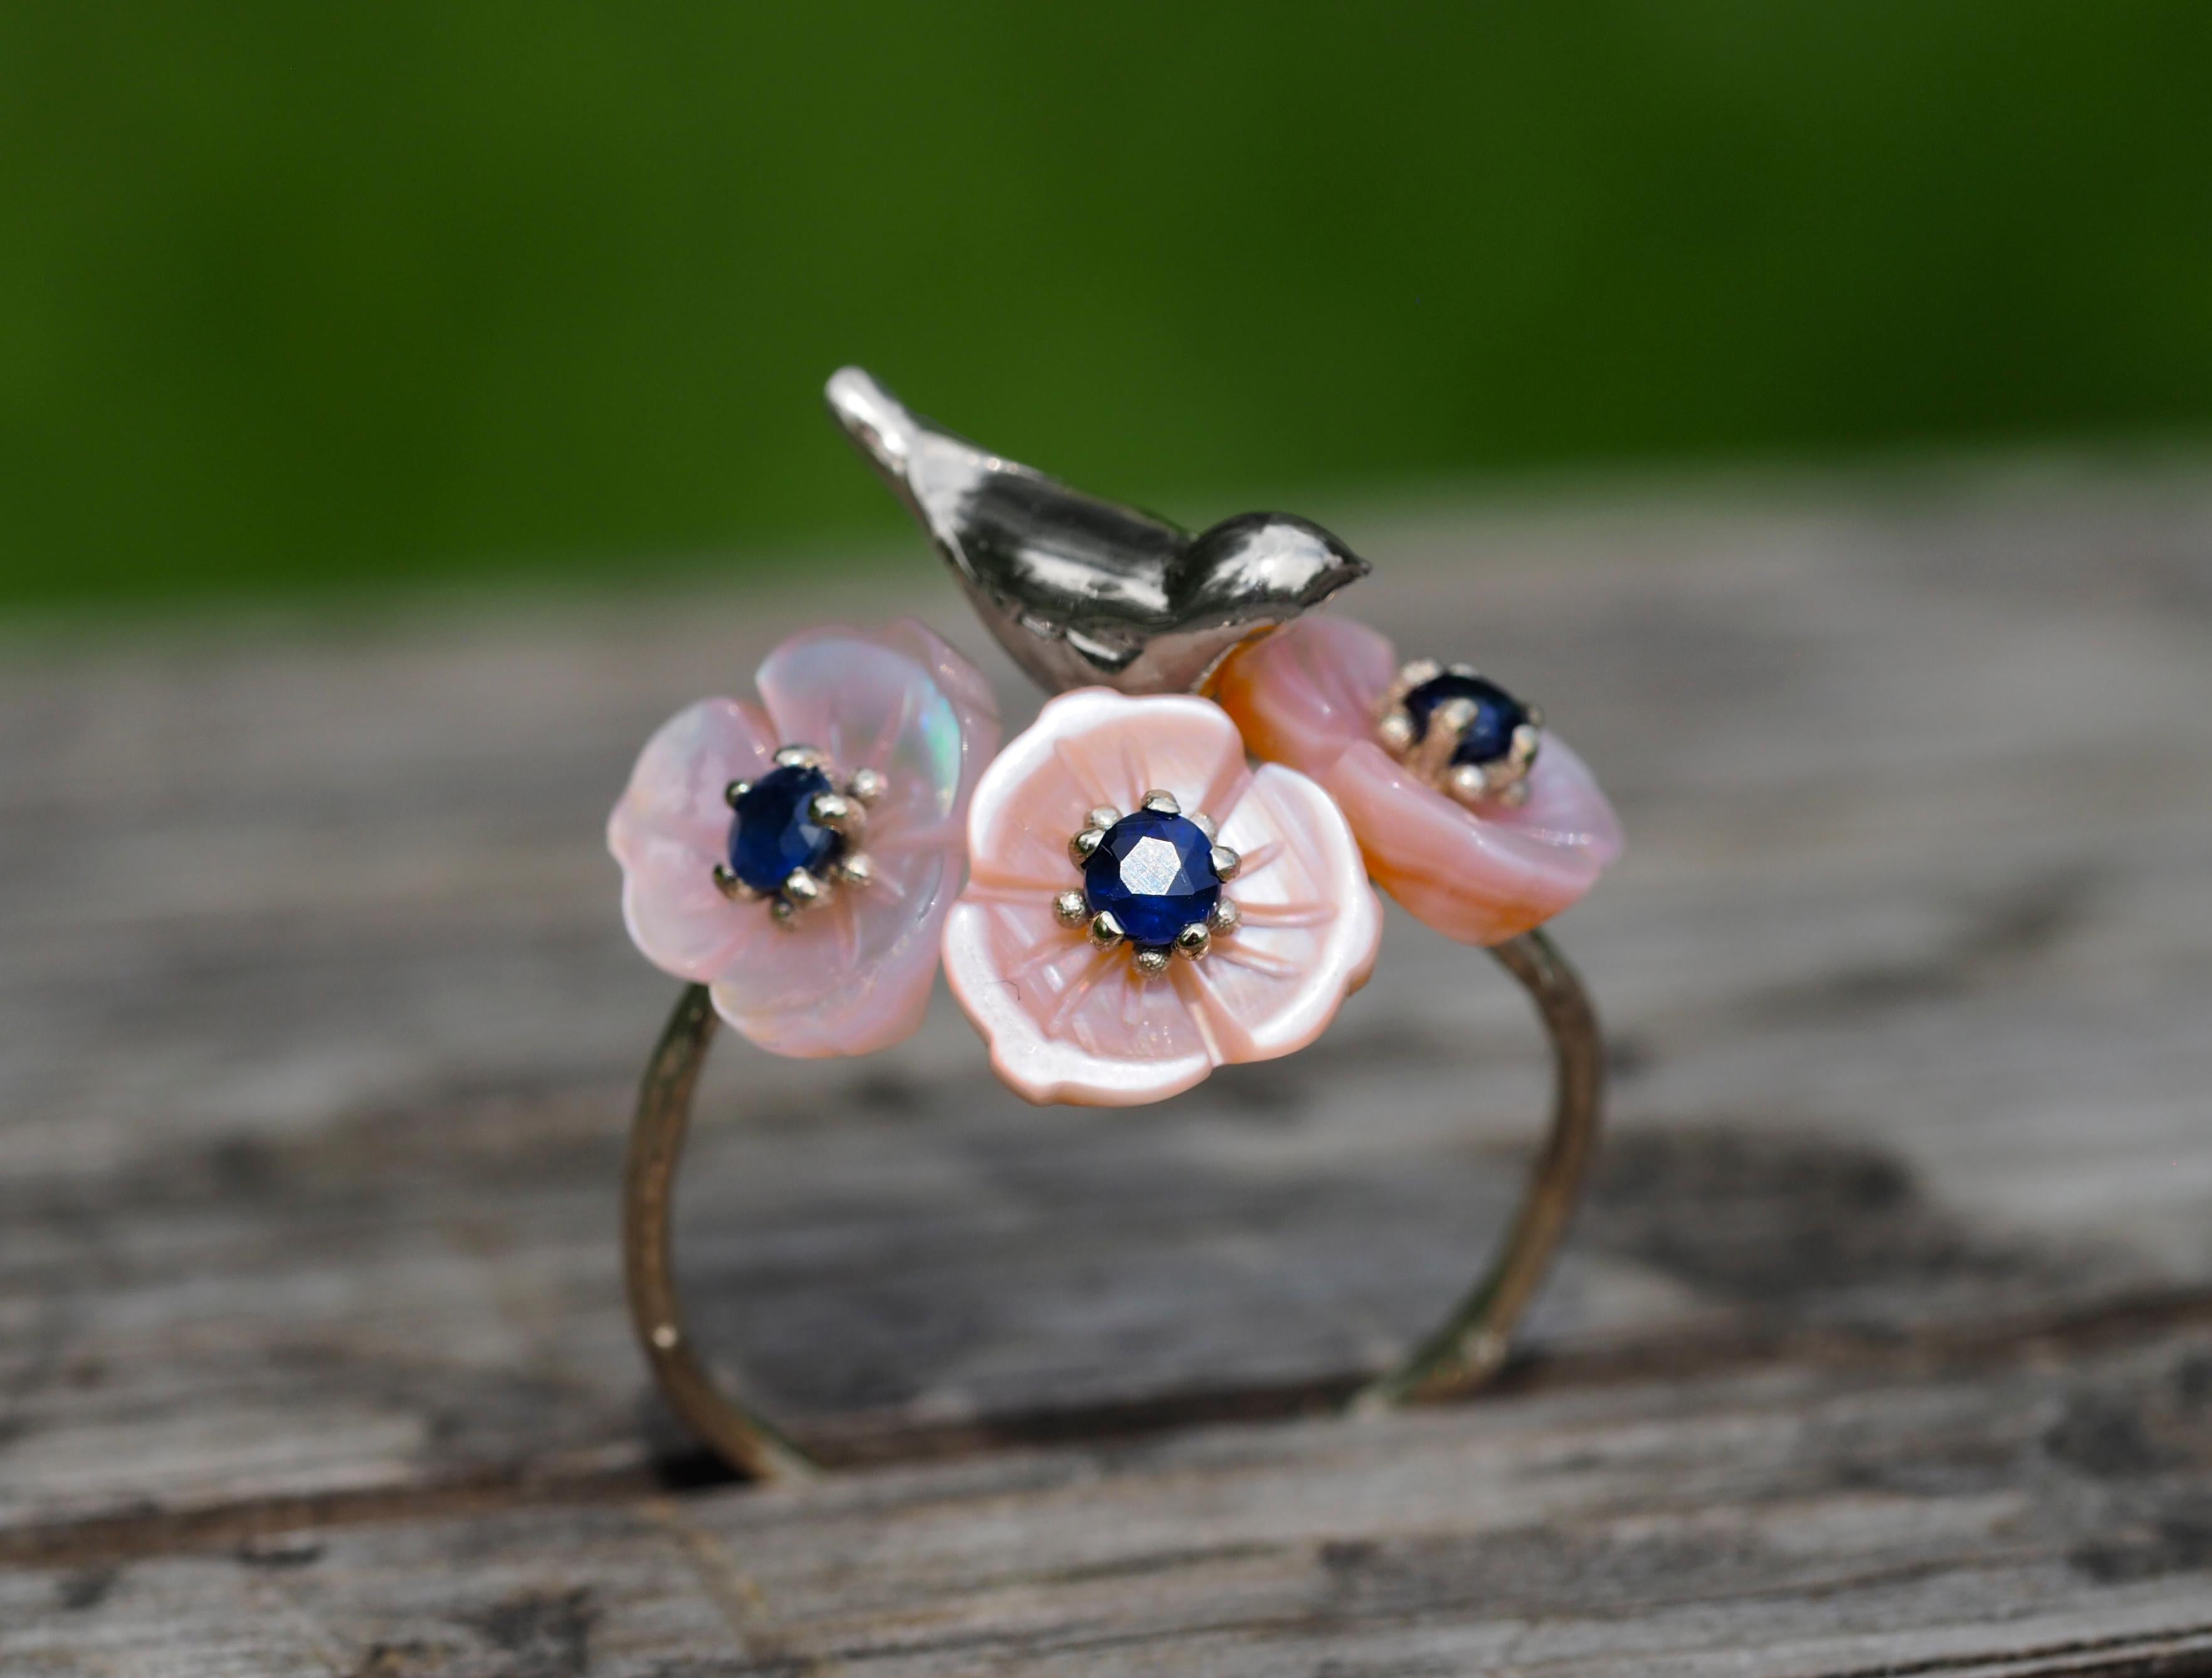 14k Gold Bird on Branch Ring with Sapphires and Carved Mother of Pearl Flowers 3